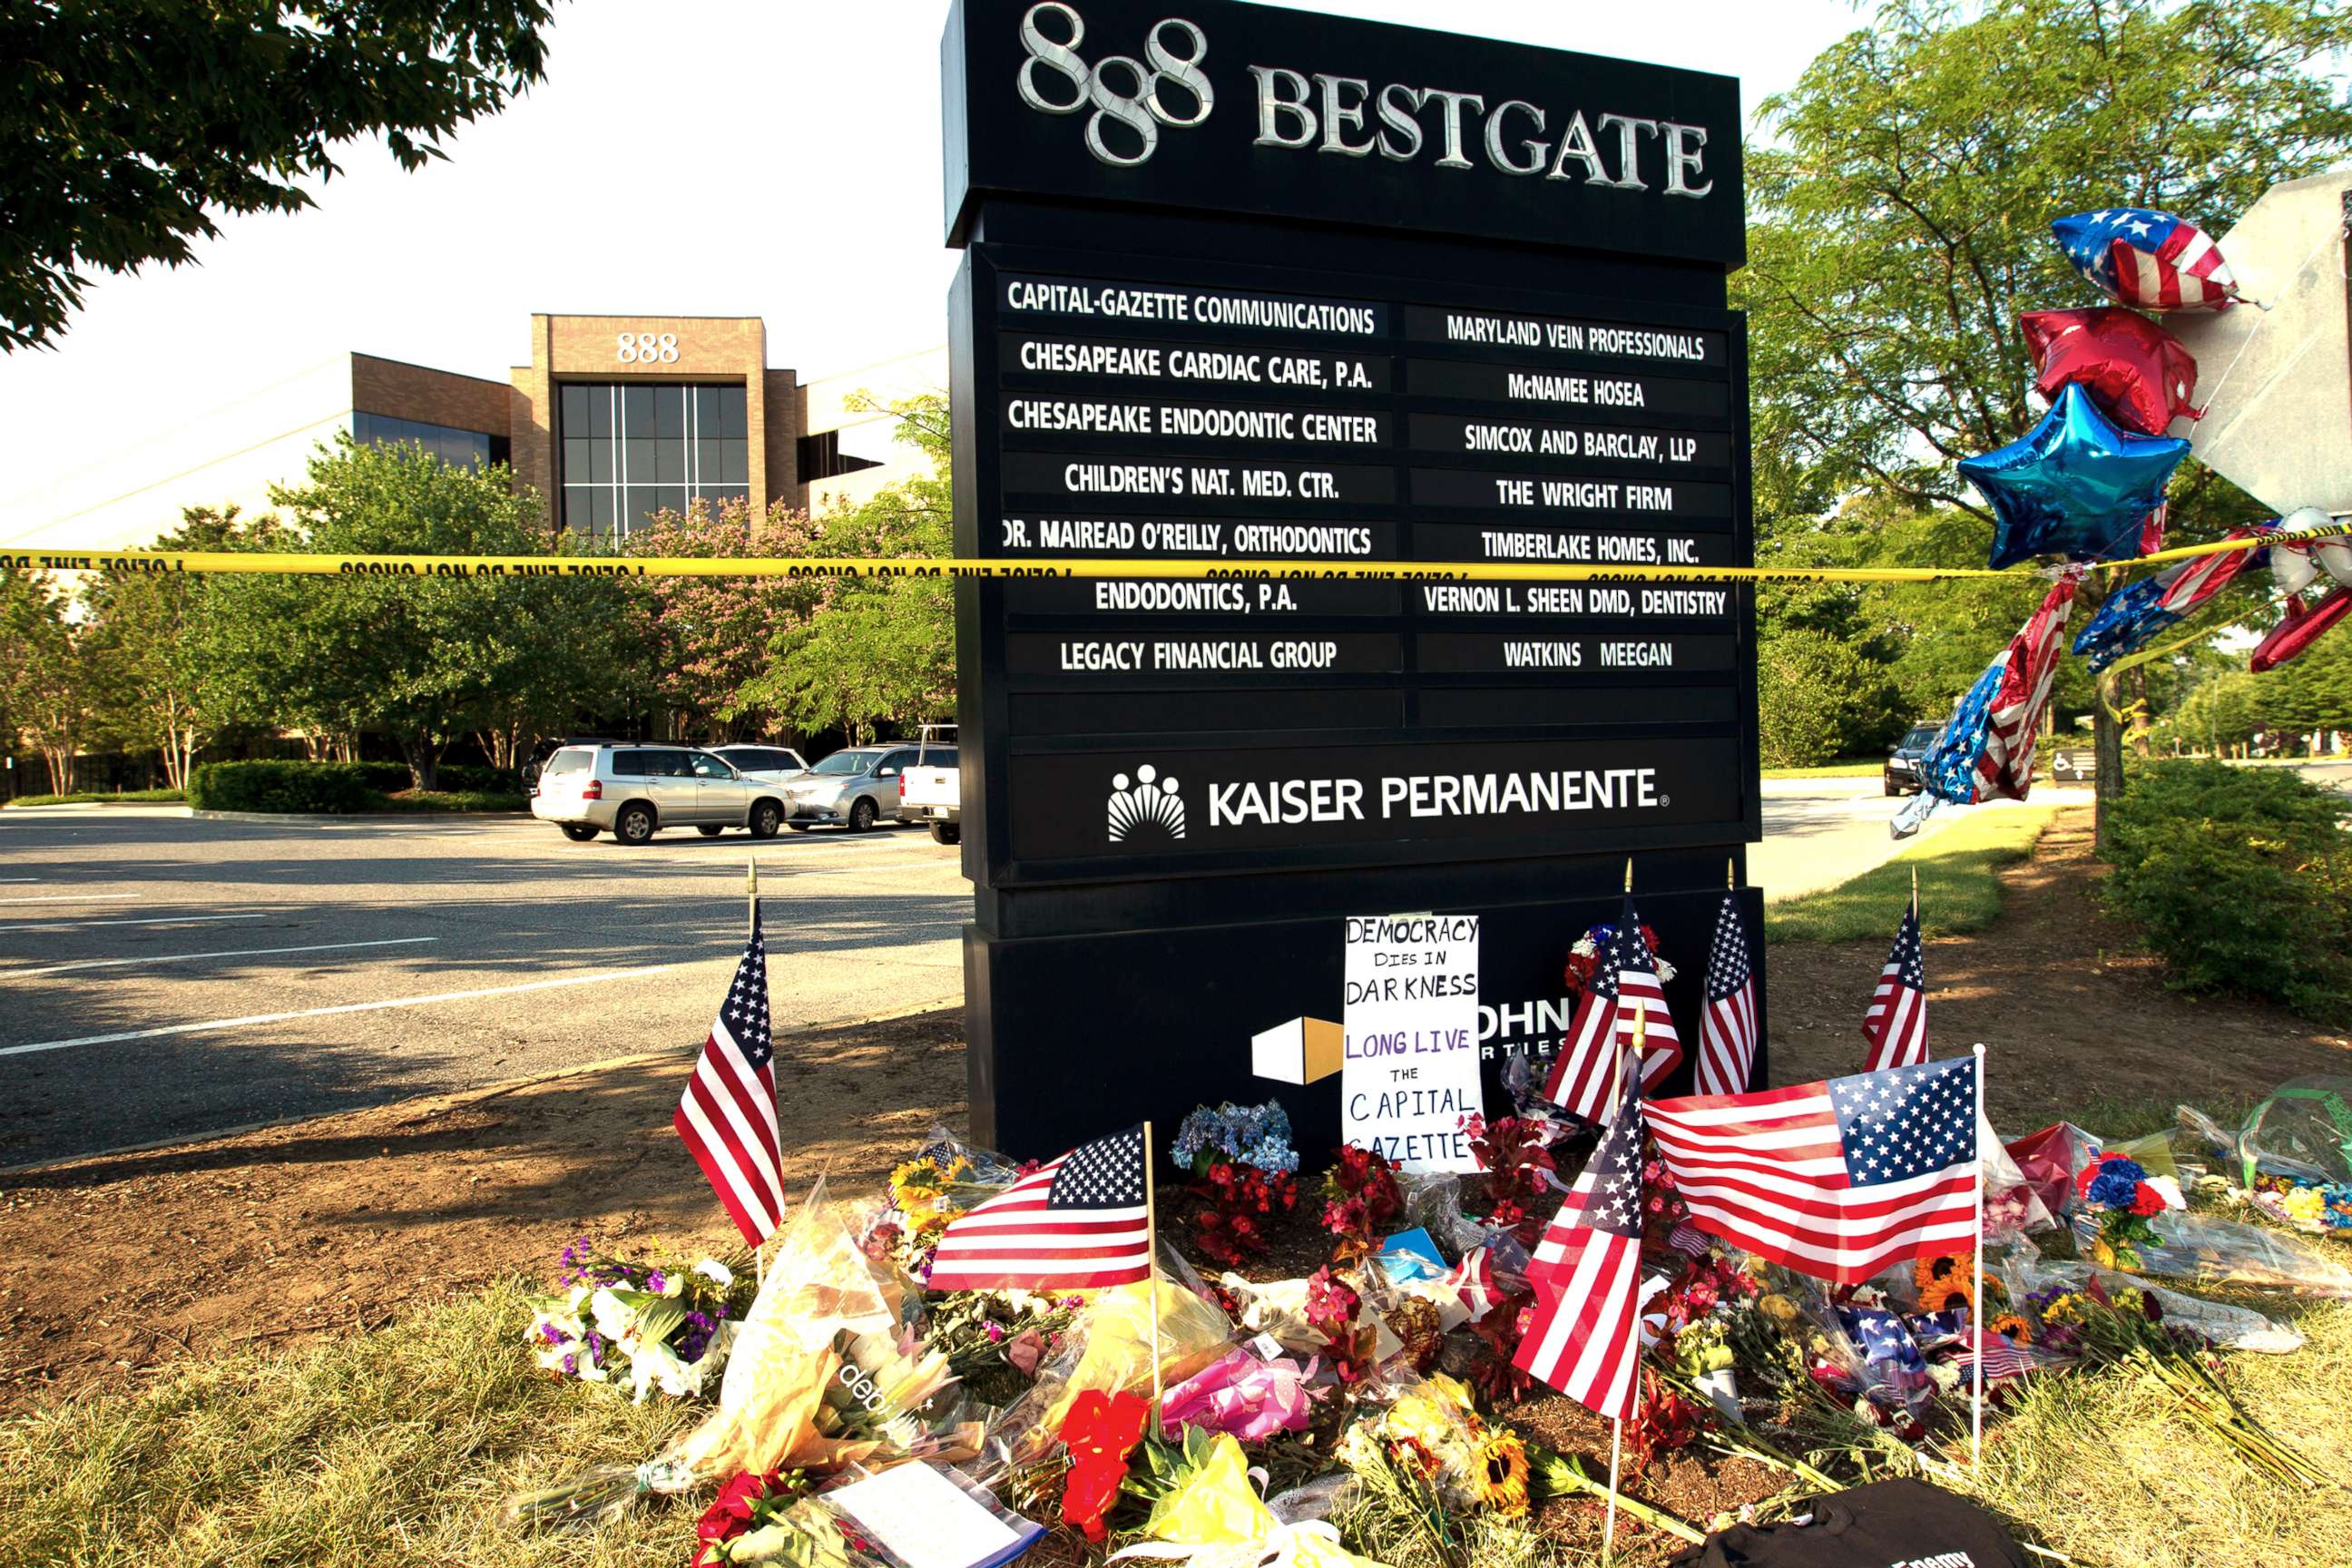 PHOTO: A makeshift memorial is seen at the scene outside the office building housing The Capital Gazette newspaper in Annapolis, Md., July 1, 2018.